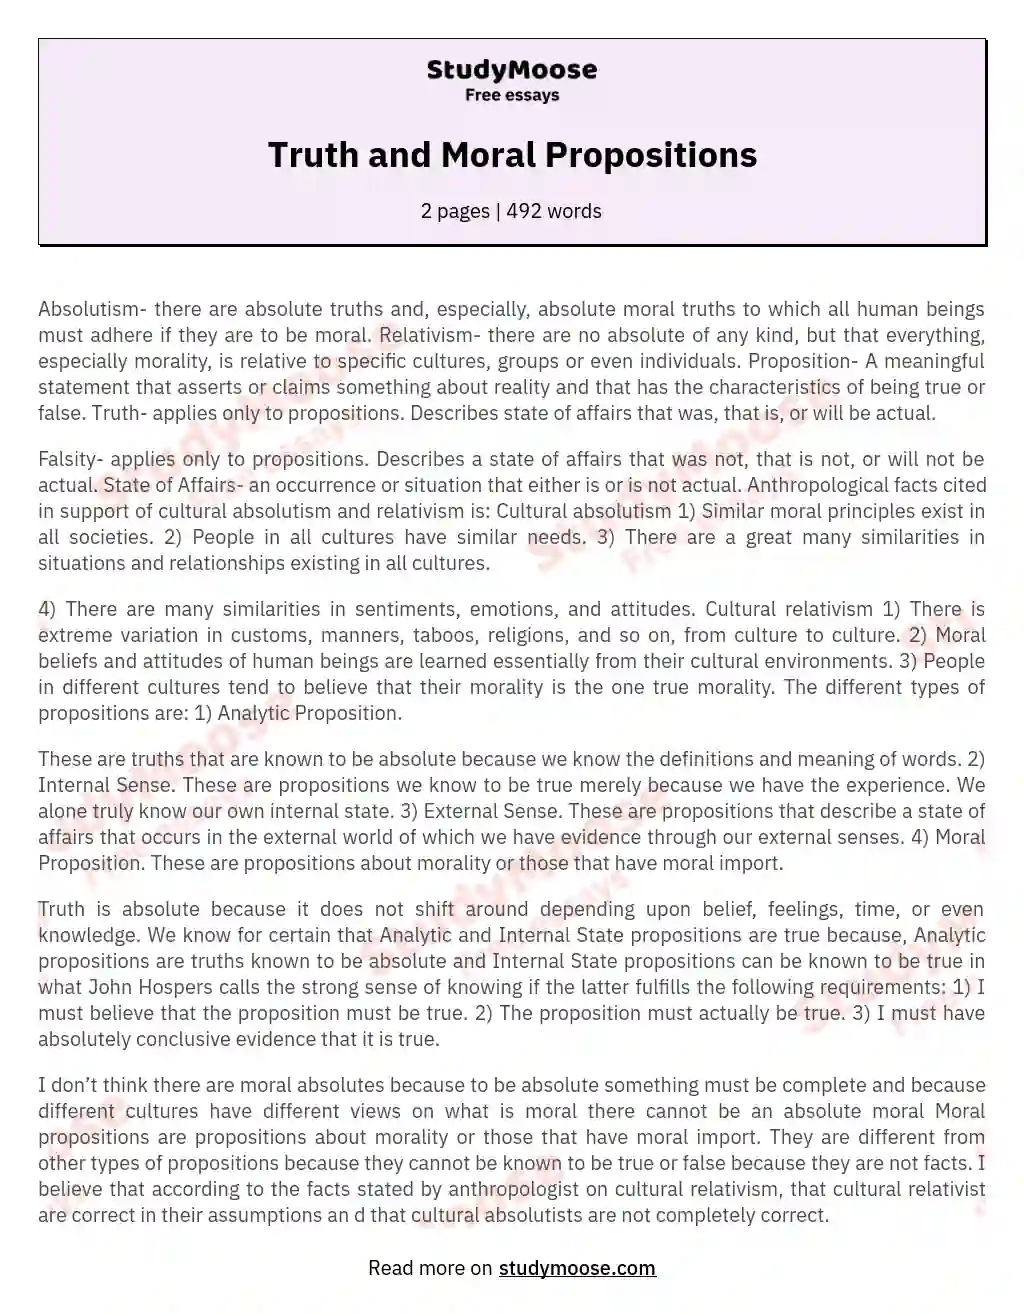 Truth and Moral Propositions essay